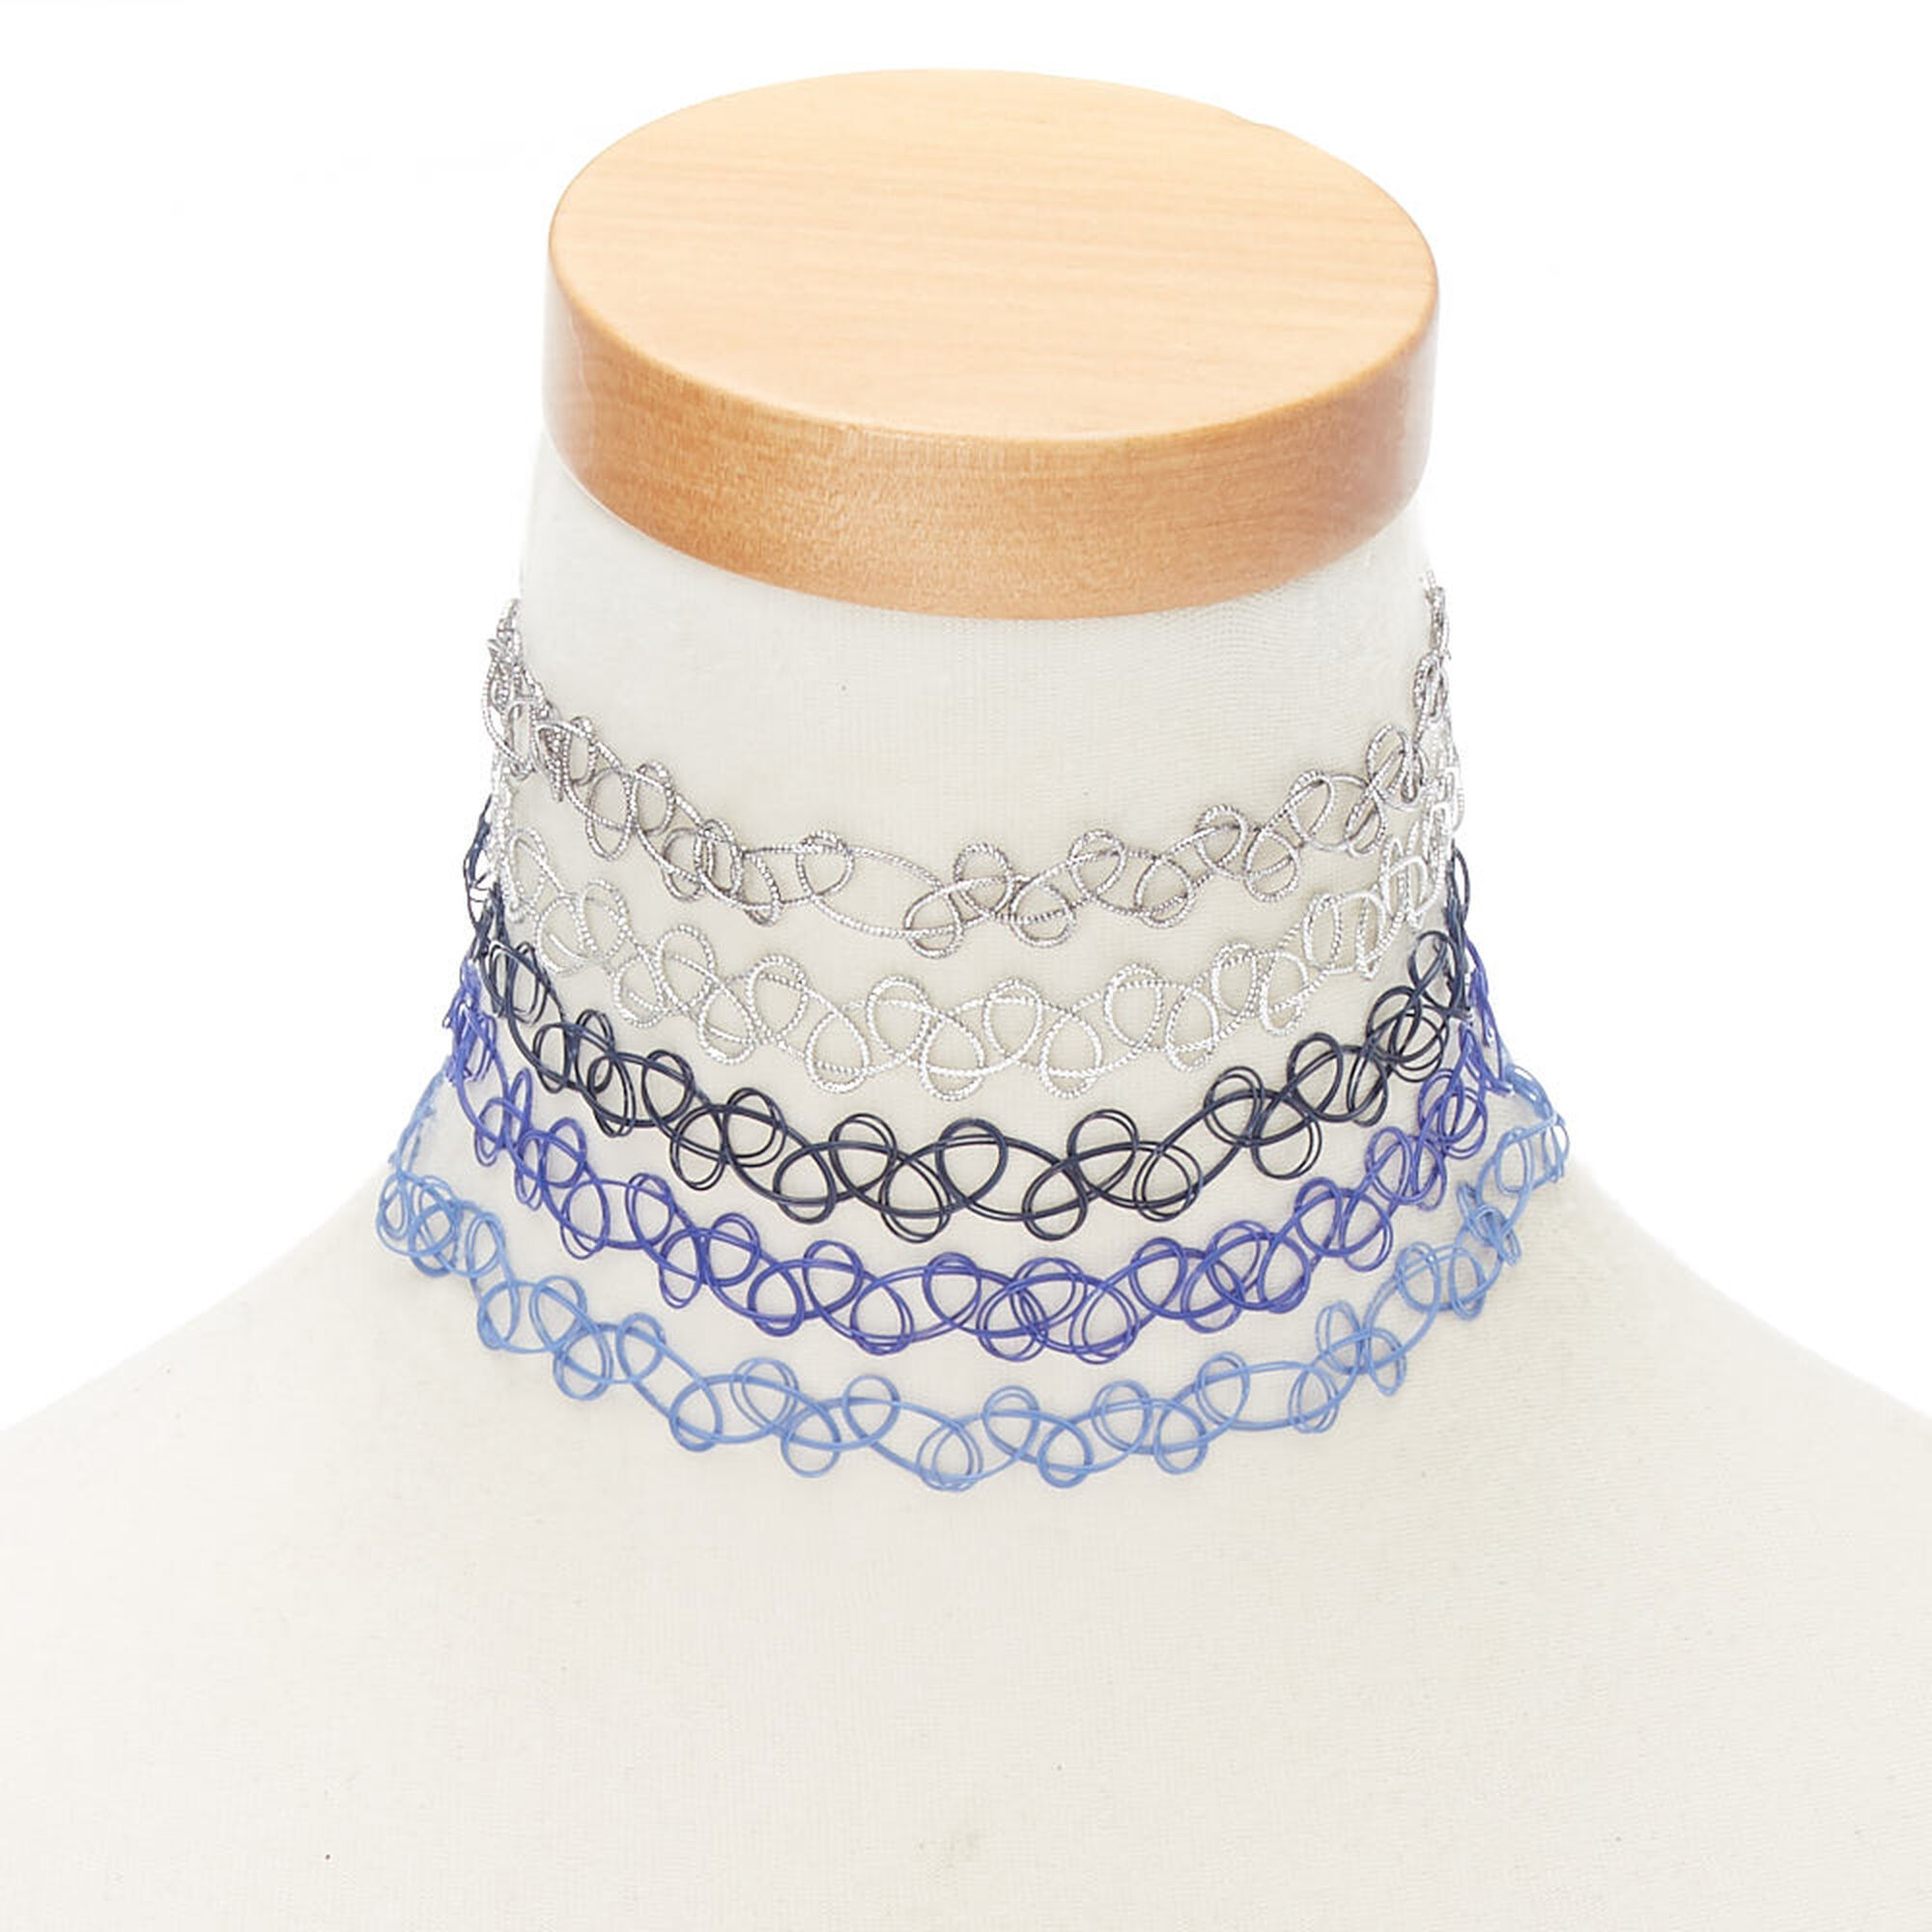 Mixed Metallic Tattoo Choker Necklaces - Blue, 5 Pack